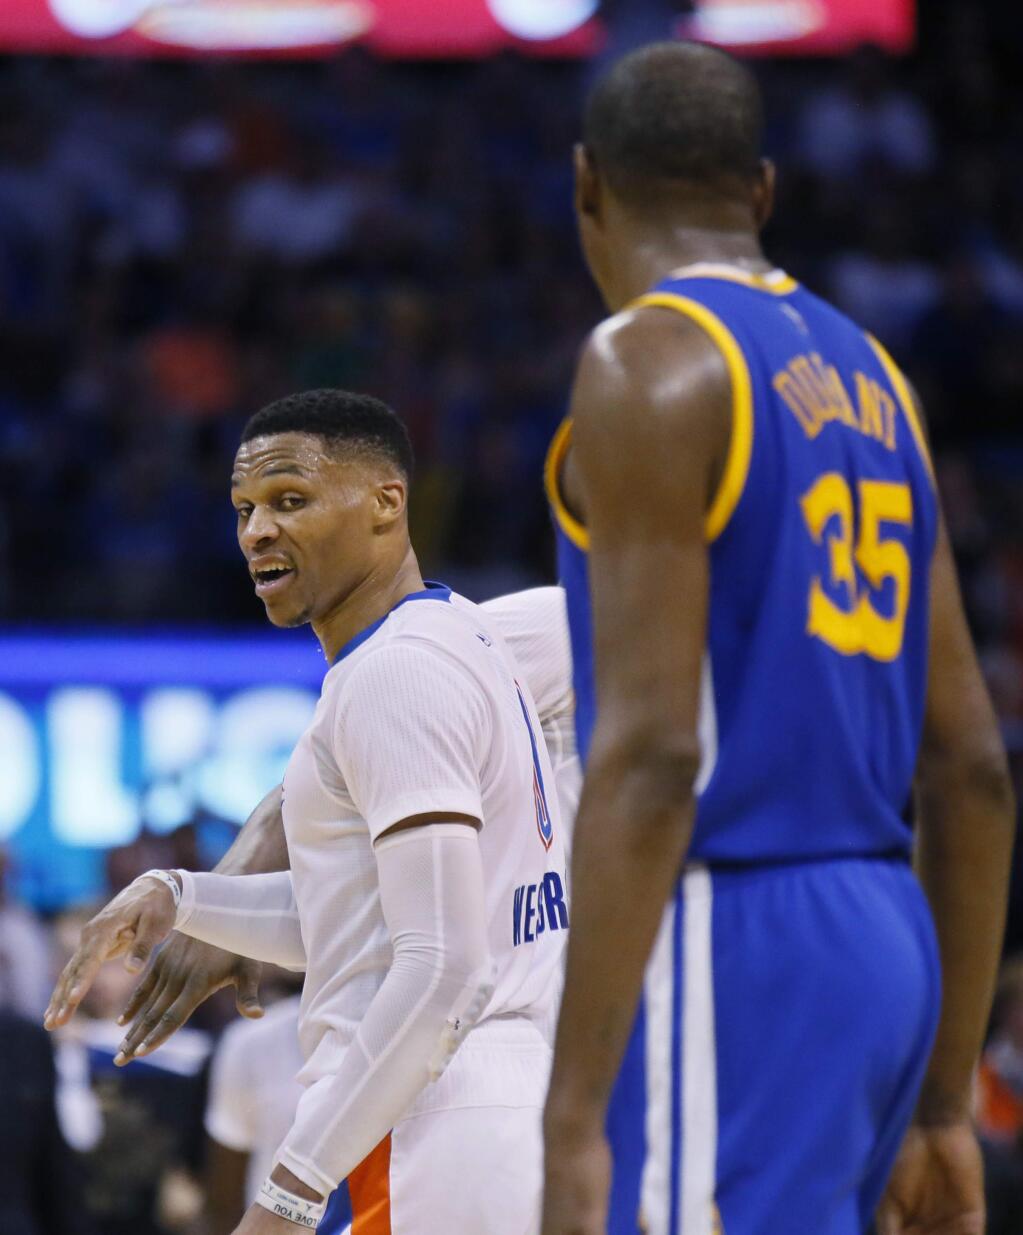 In this Feb. 11, 2017, file photo, Oklahoma City Thunder guard Russell Westbrook, left, comments to Golden State Warriors forward Kevin Durant as they walk offcourt for a timeout in the third quarter in Oklahoma City. (AP Photo/Sue Ogrocki, File)